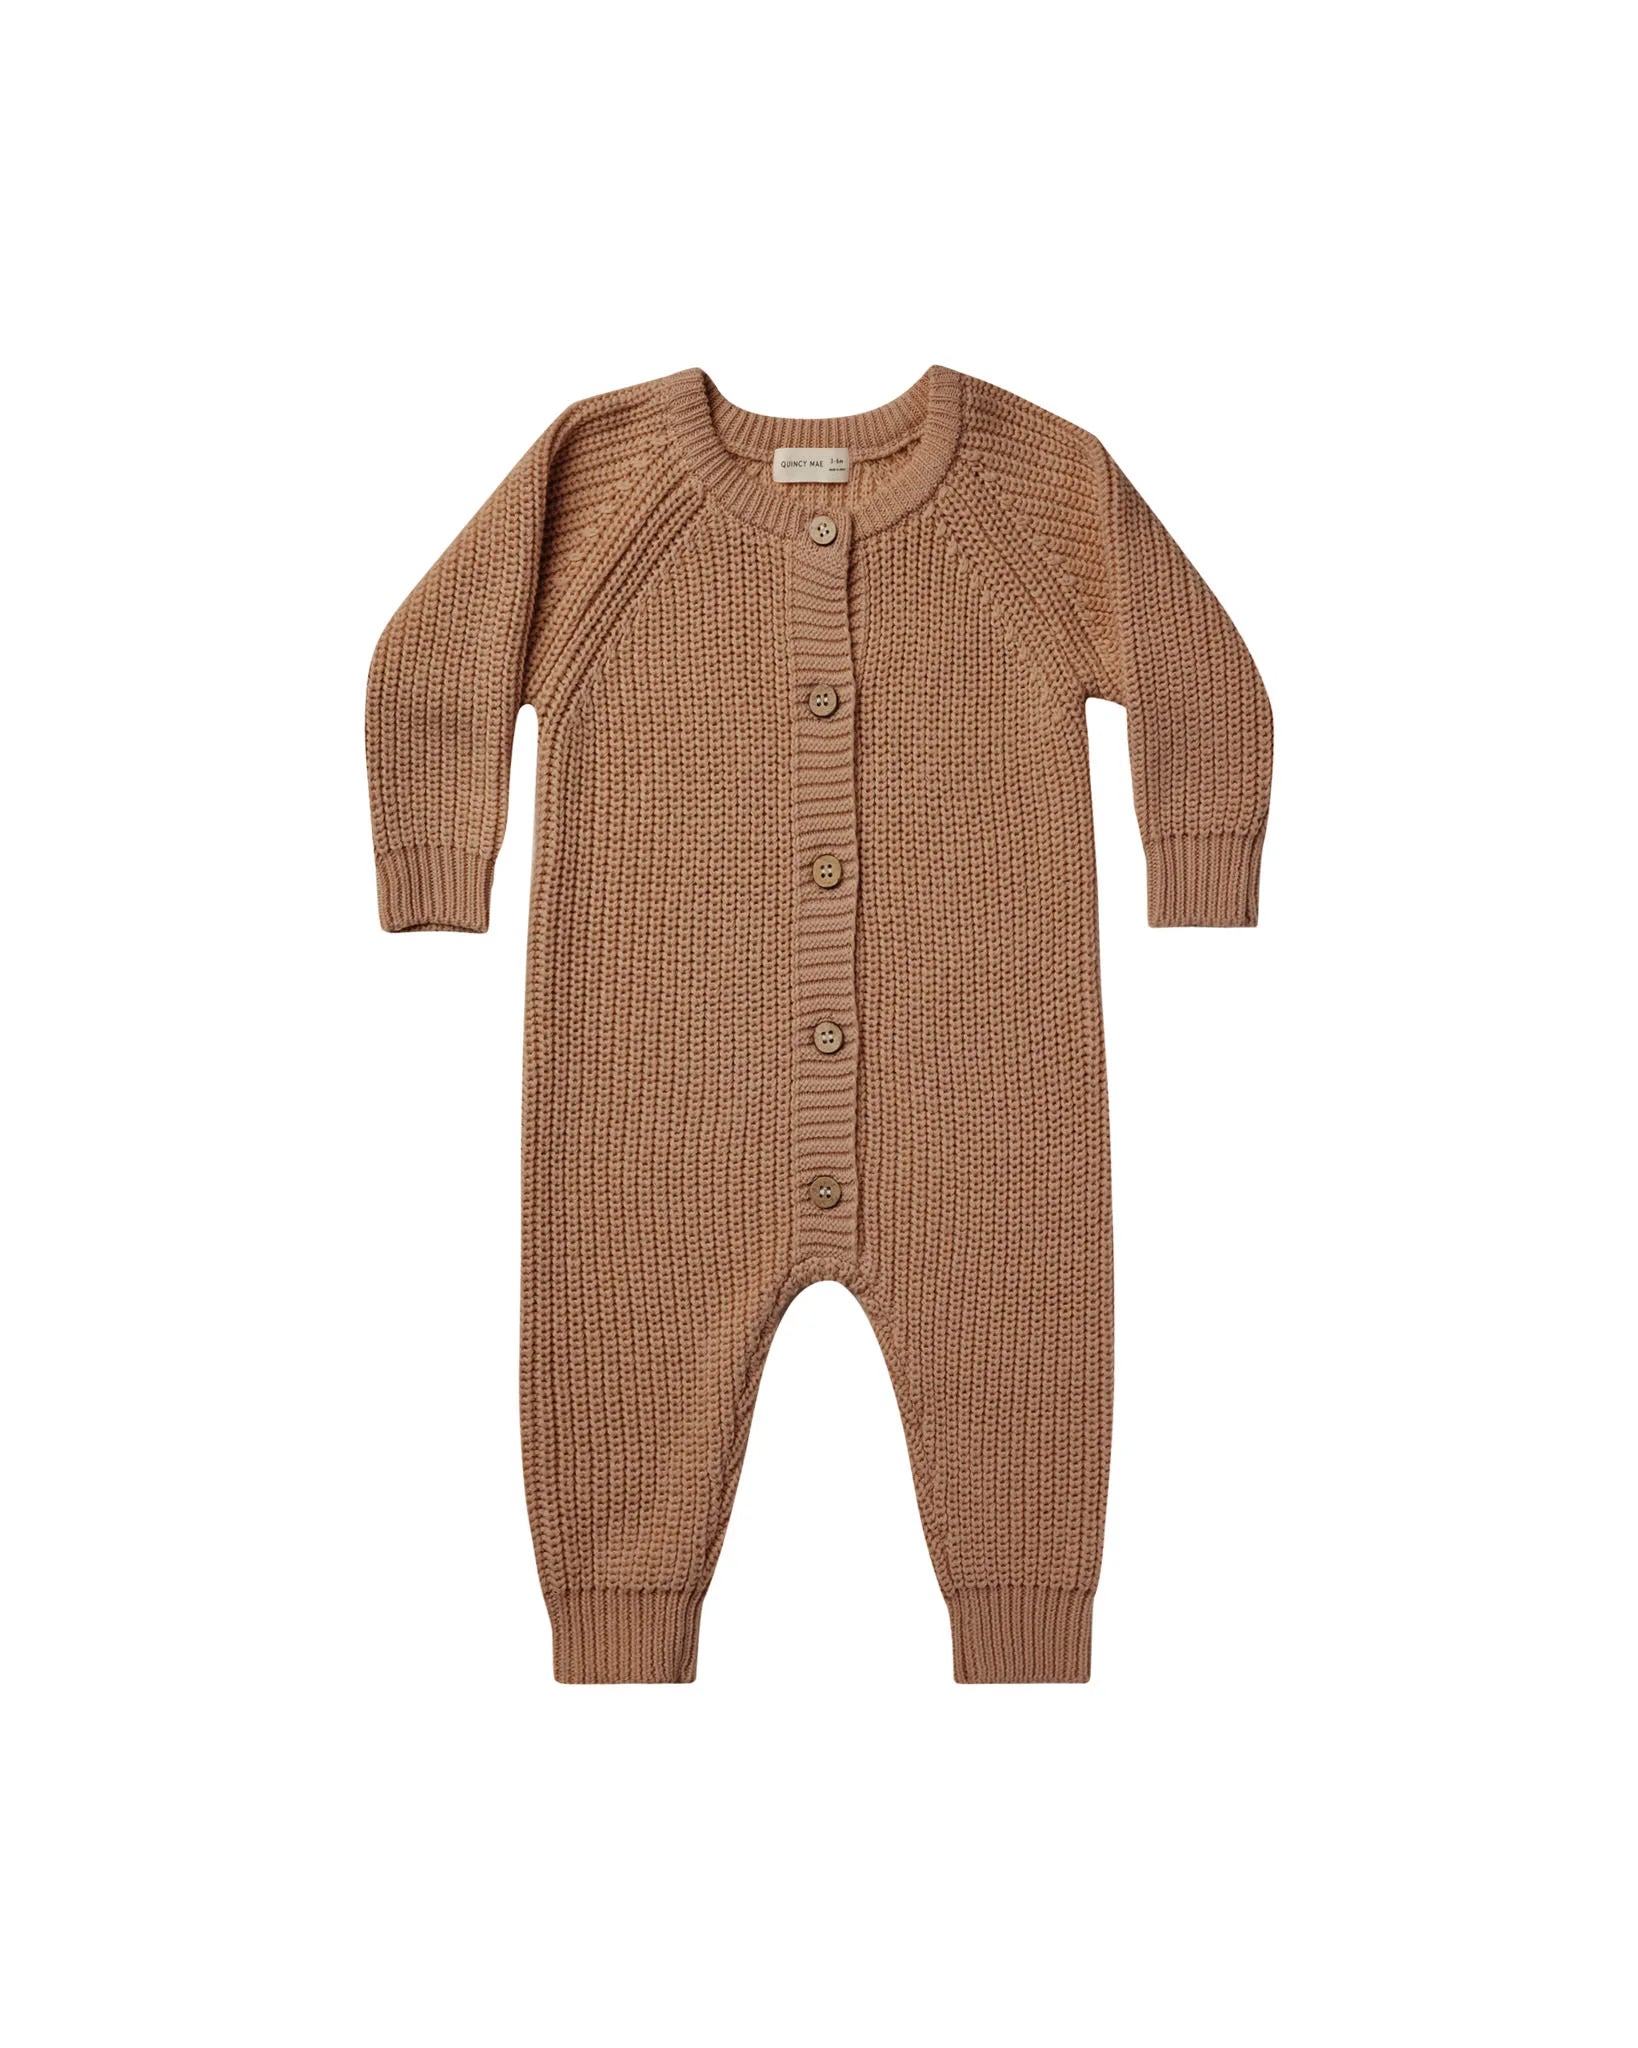 cinnamon romper with buttons all the way down